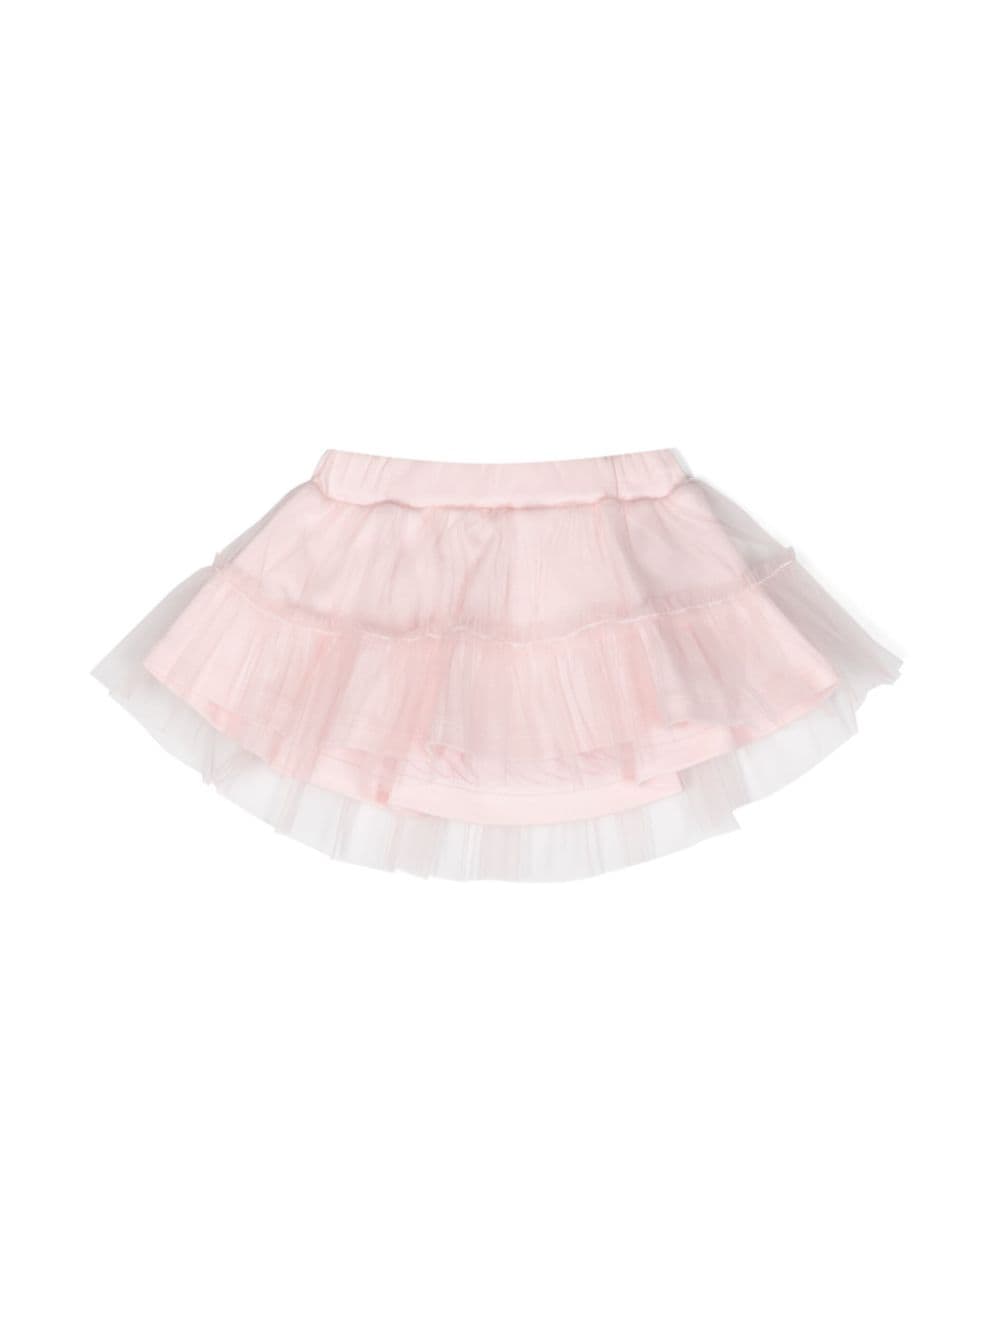 Skirt with tulle layer